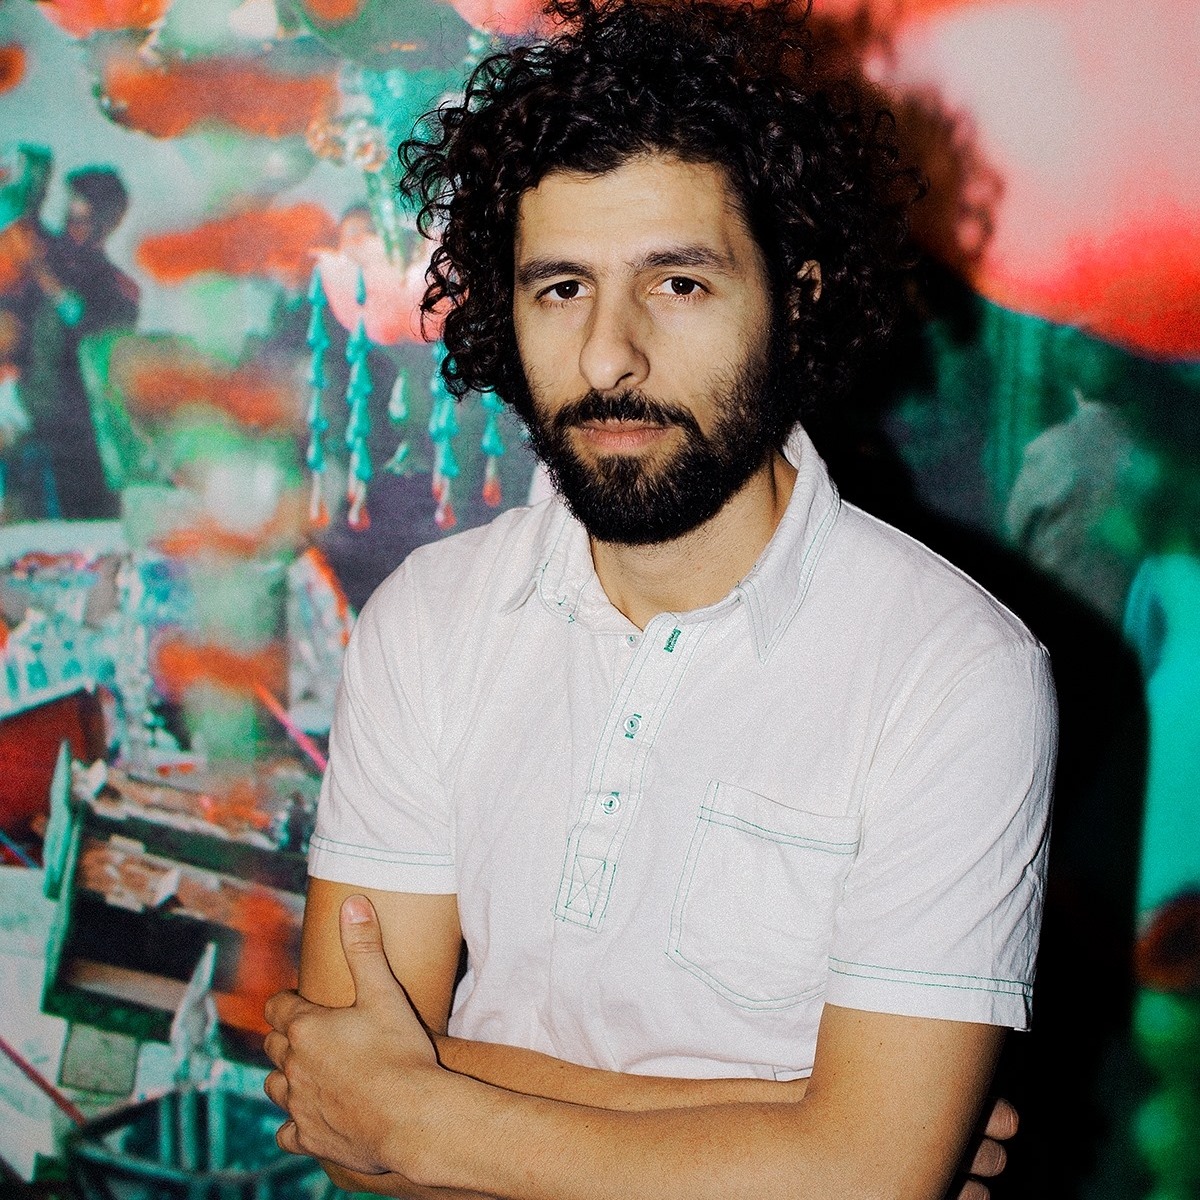 Jose Gonzalez & The String Theory at Fox Theater Oakland